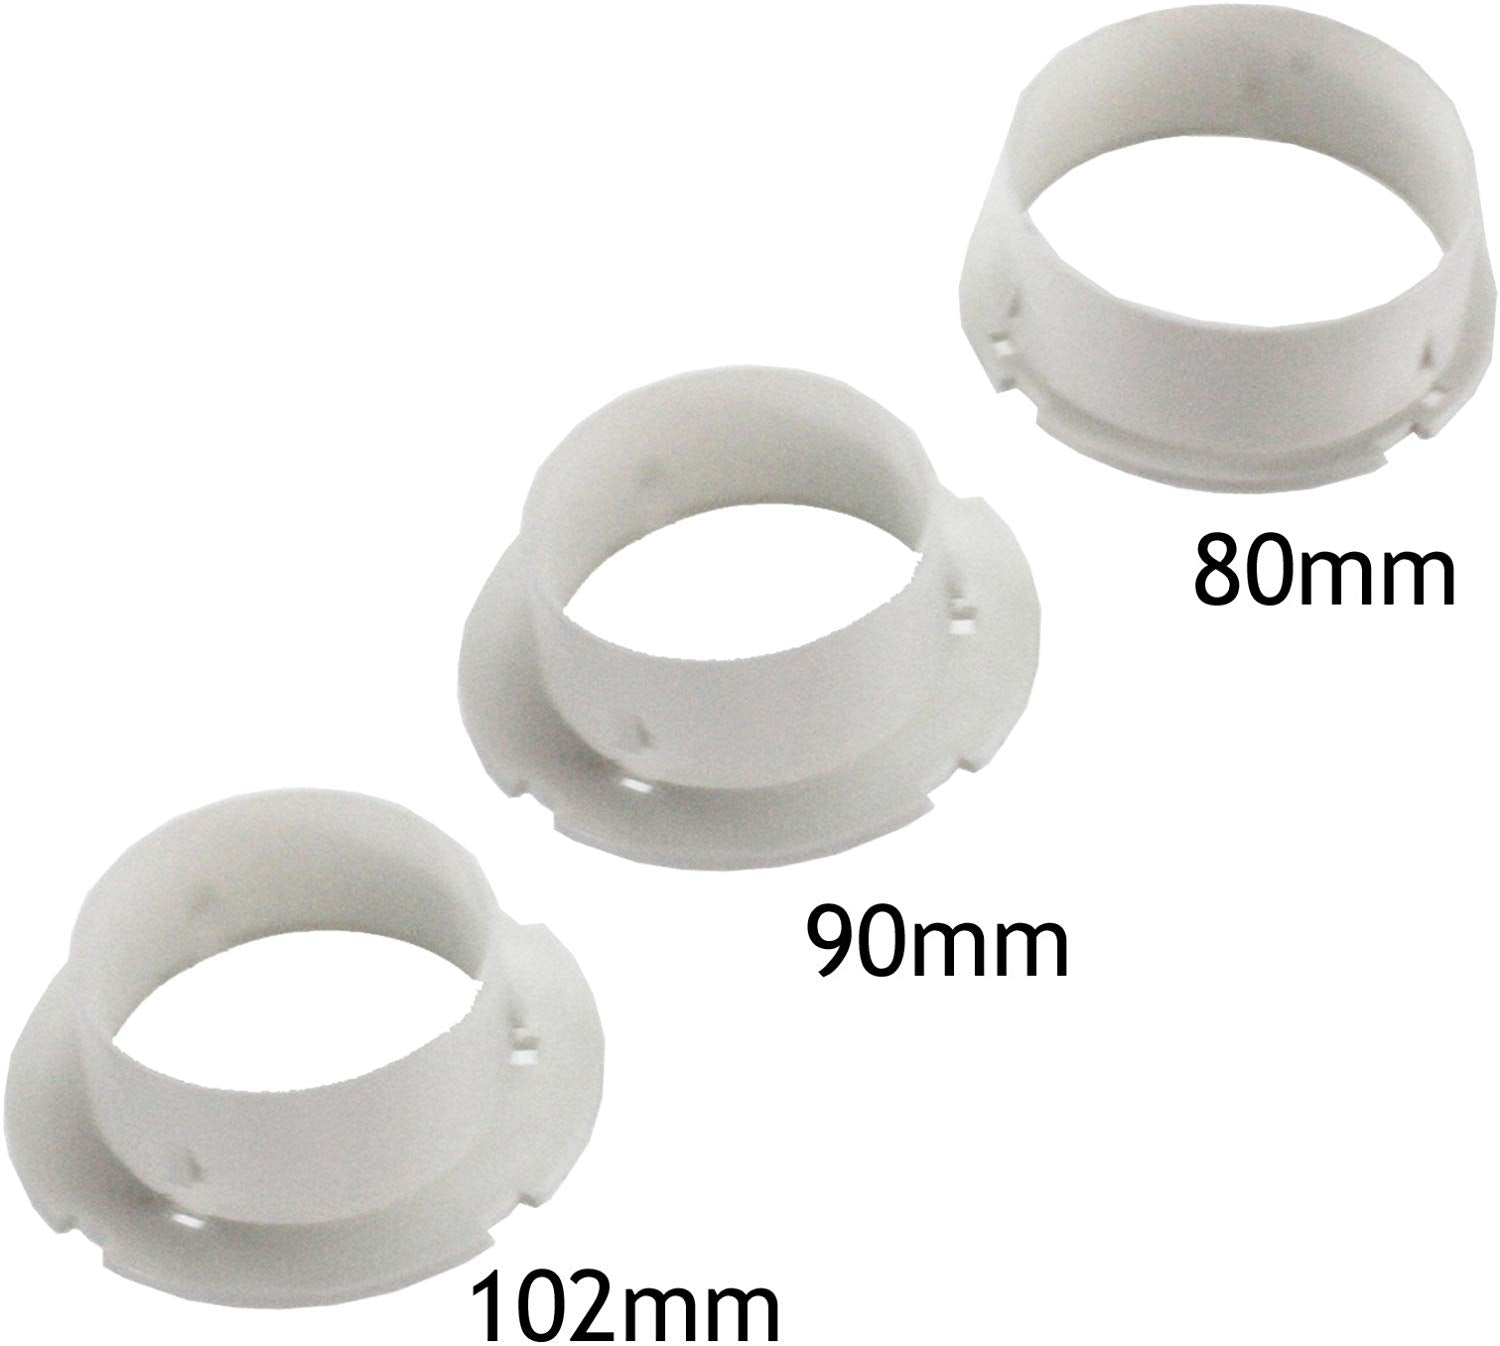 Vent Hose Condenser Kit with 3 x Adapters for AEG Tumble Dryer (1.2m)